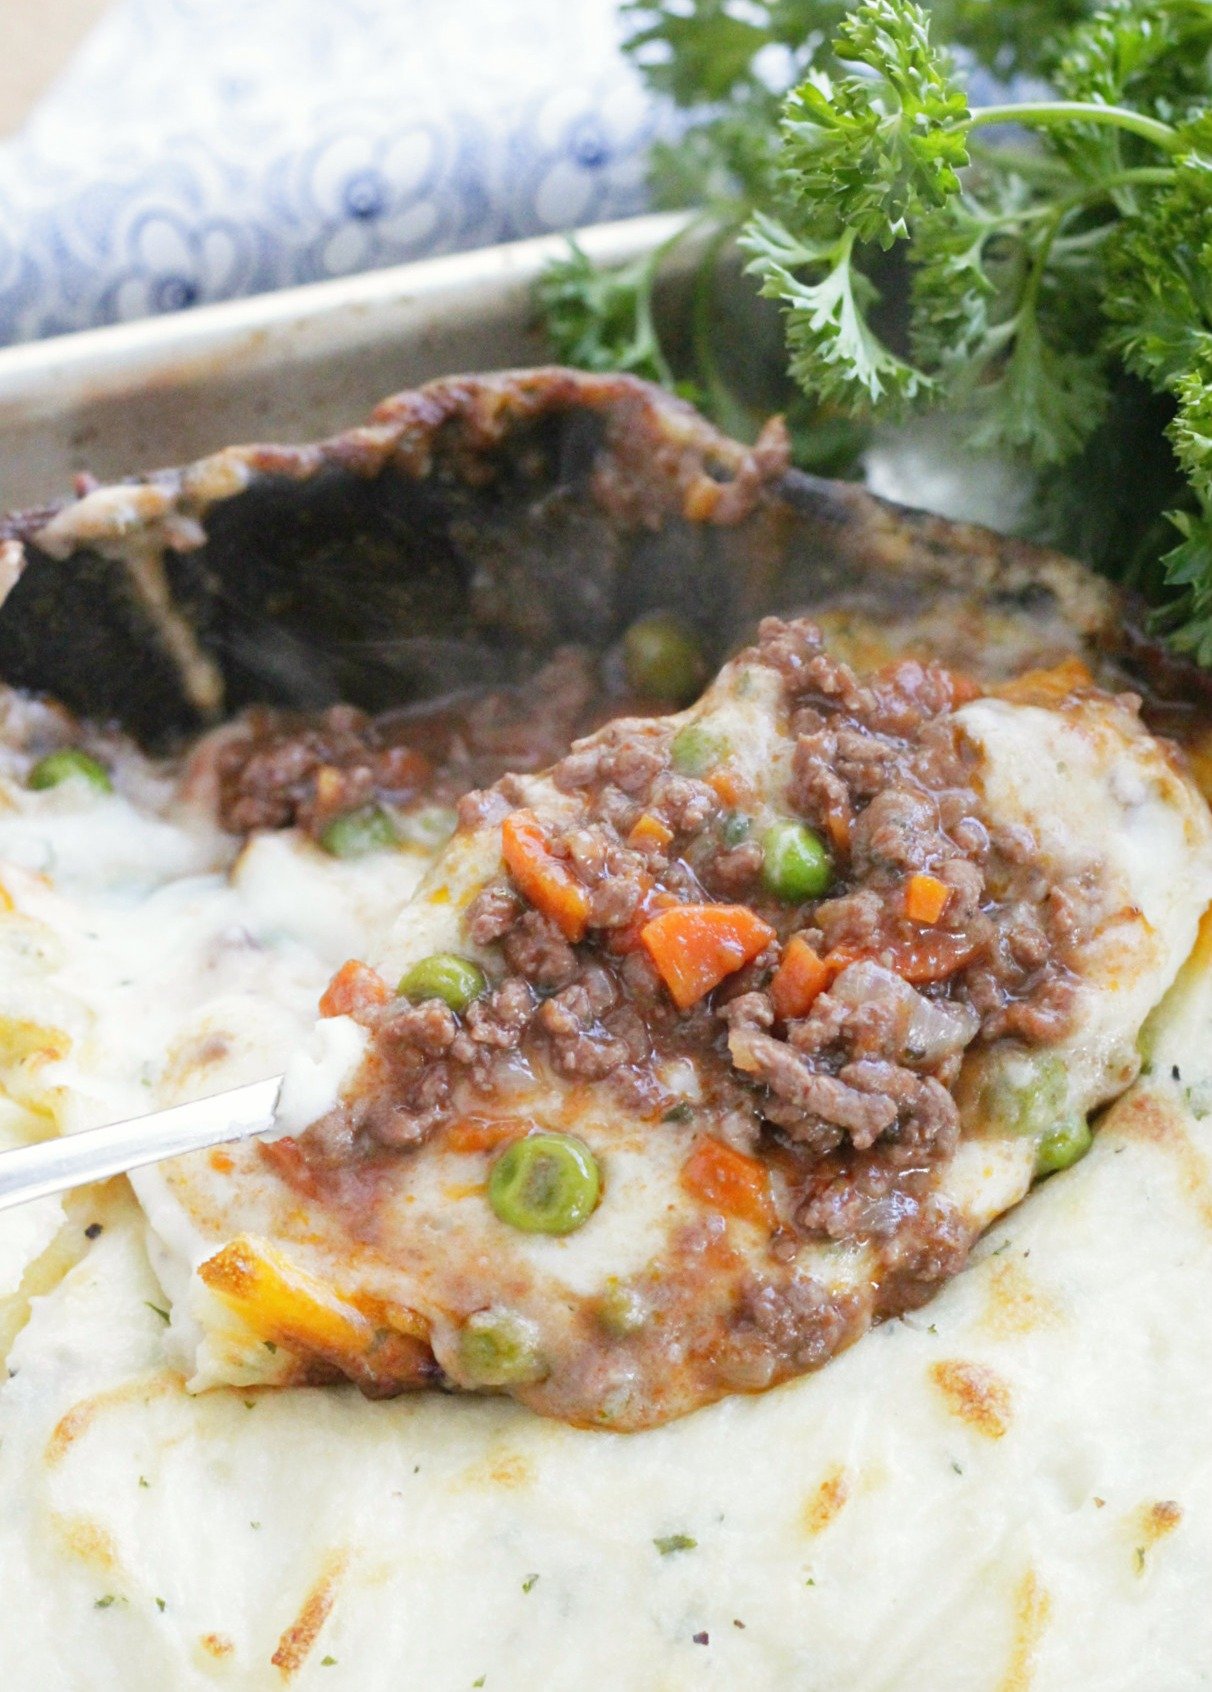 showing the beef and gravy filling underneath the mashed potato topping of the skillet shepherd's pie